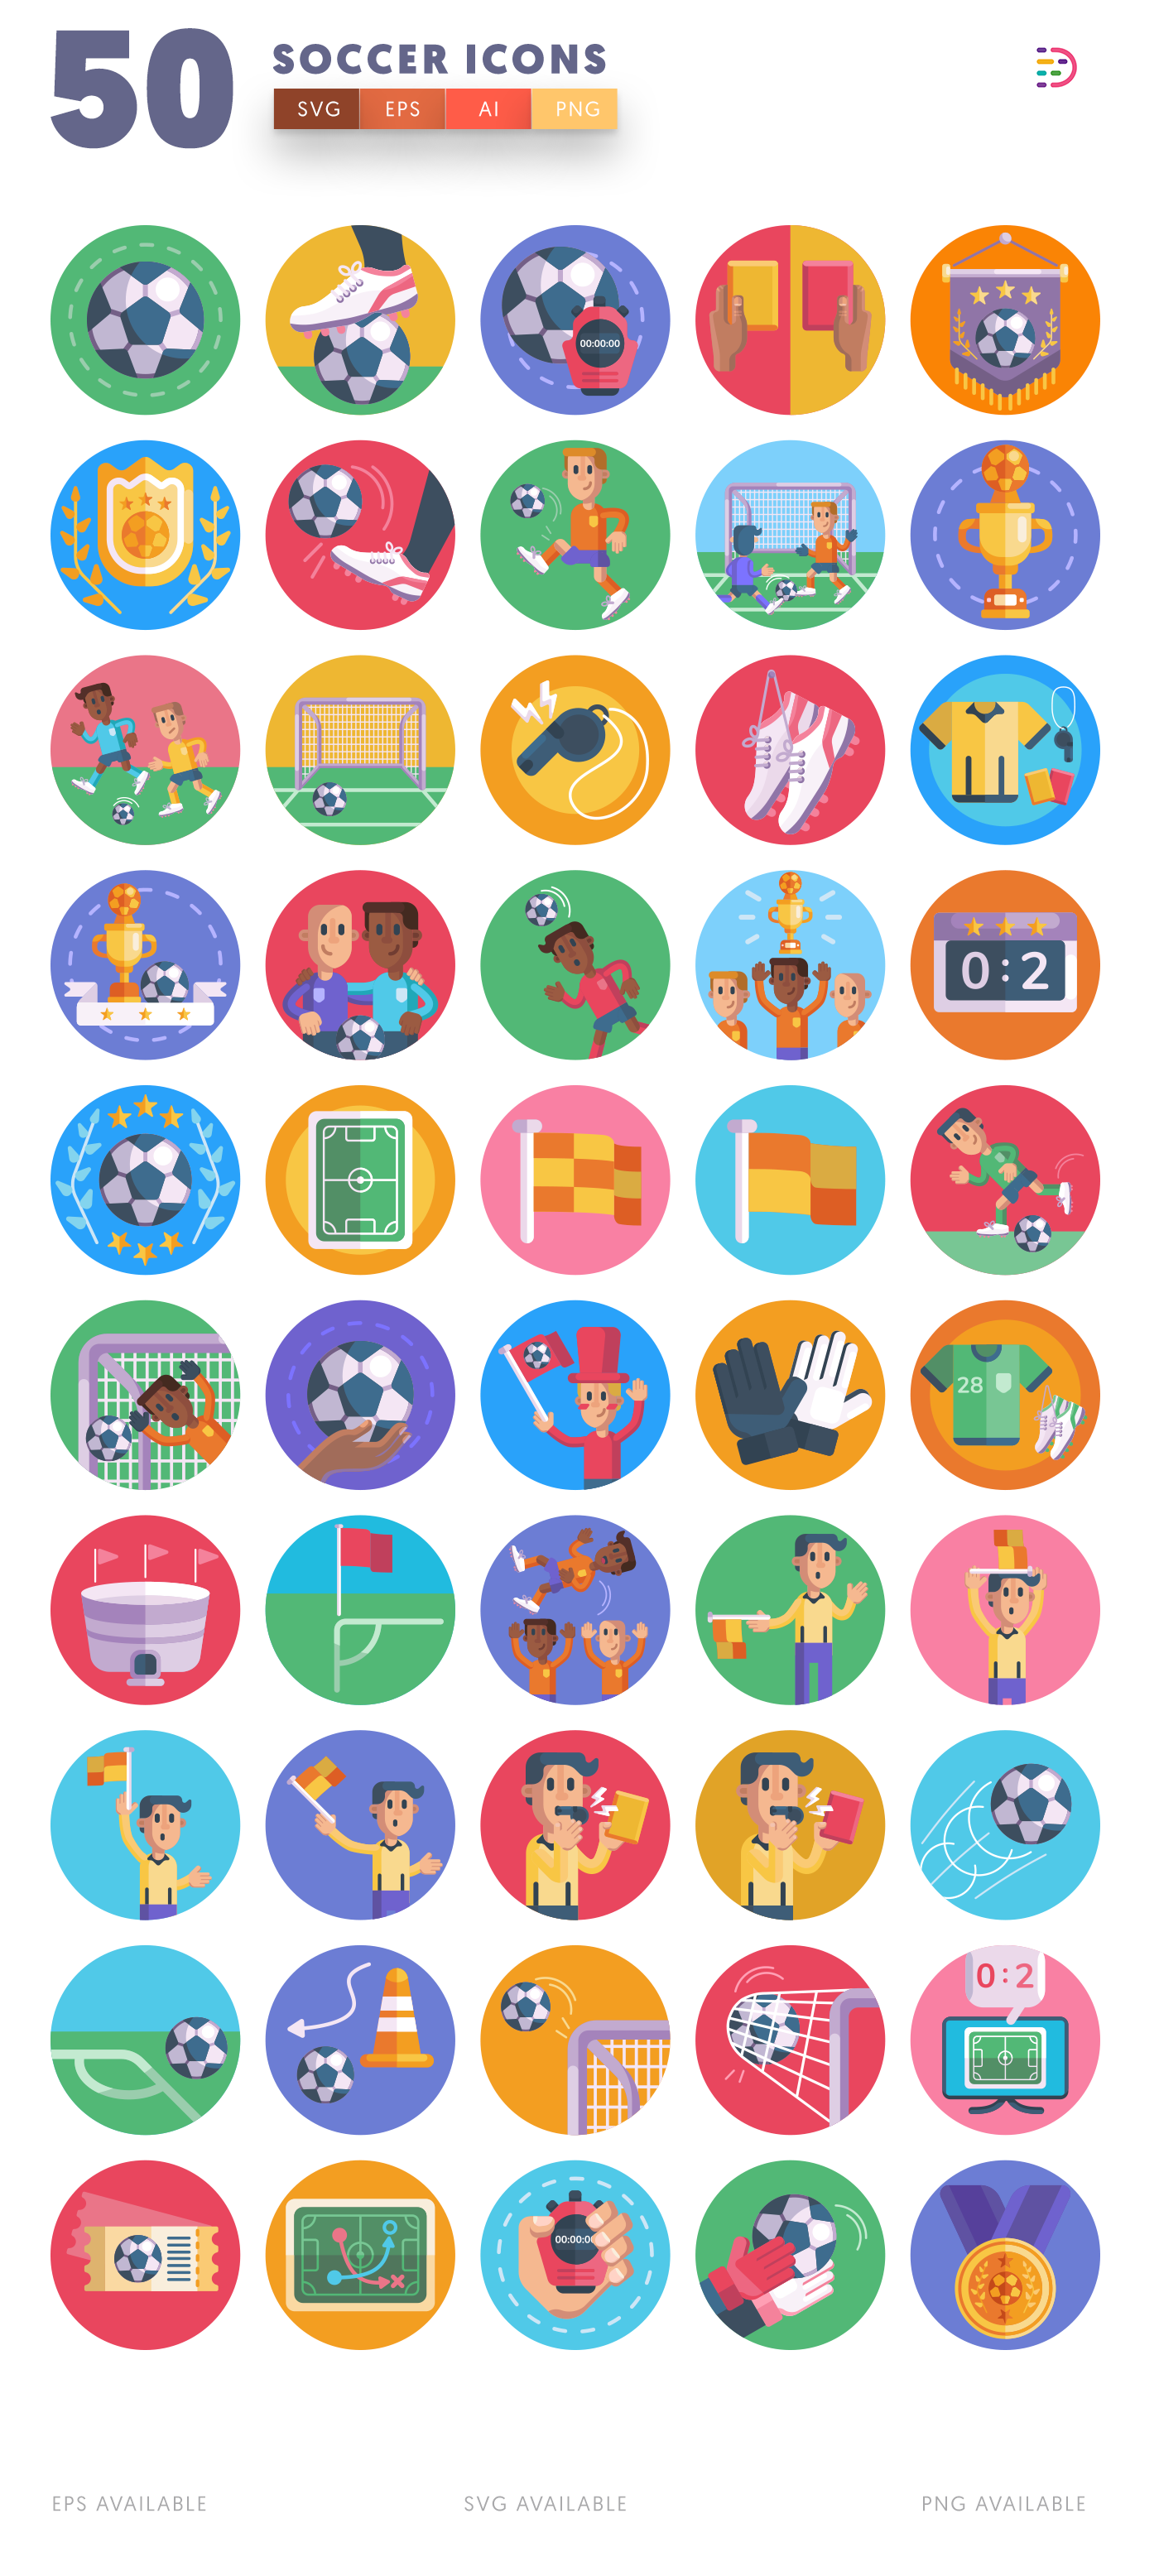 Soccer icon pack